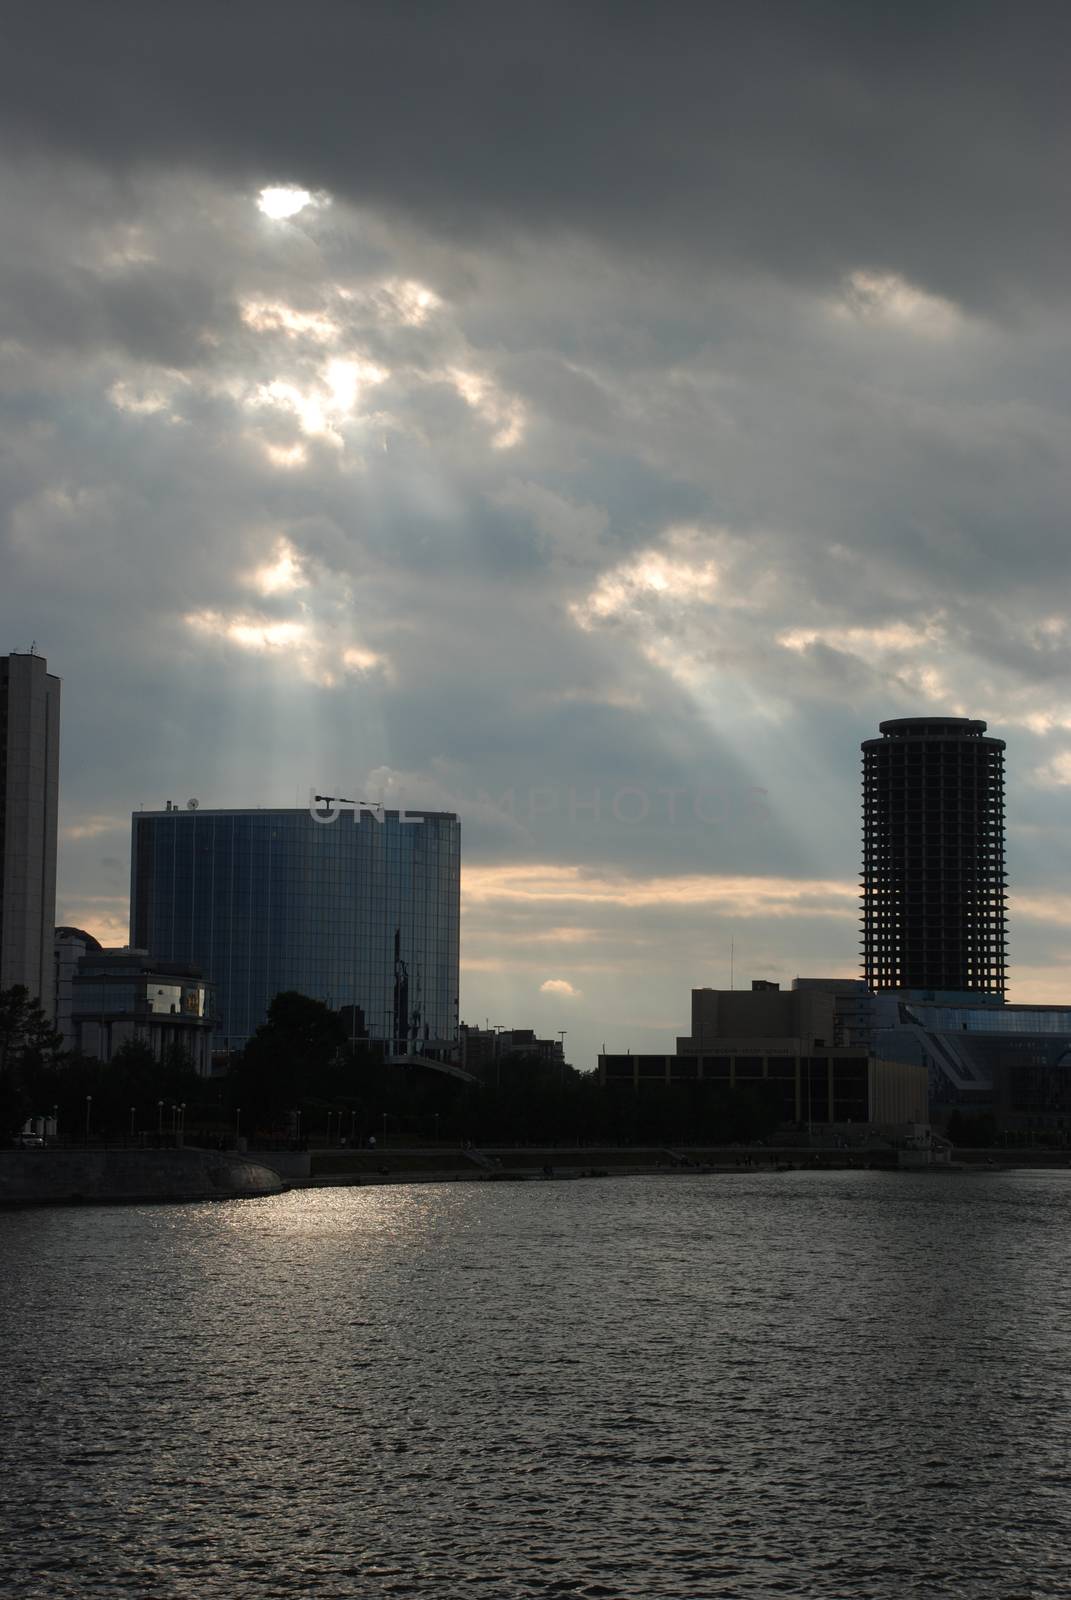 Rays of the sun coming through clouds over the buildings near the river